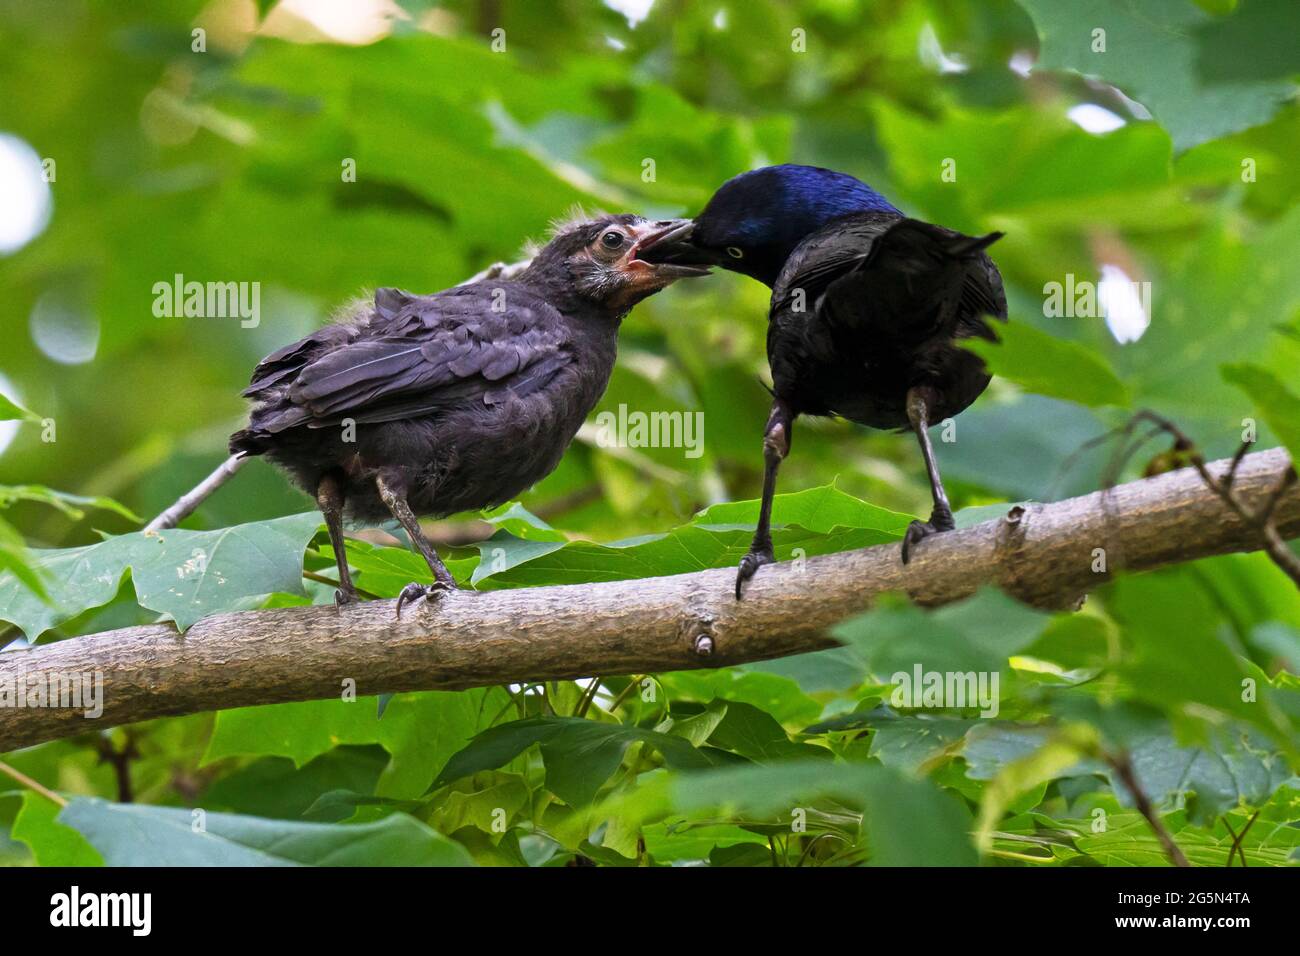 Common Grackle (Quiscalus quiscula) feeding a fledgling Stock Photo